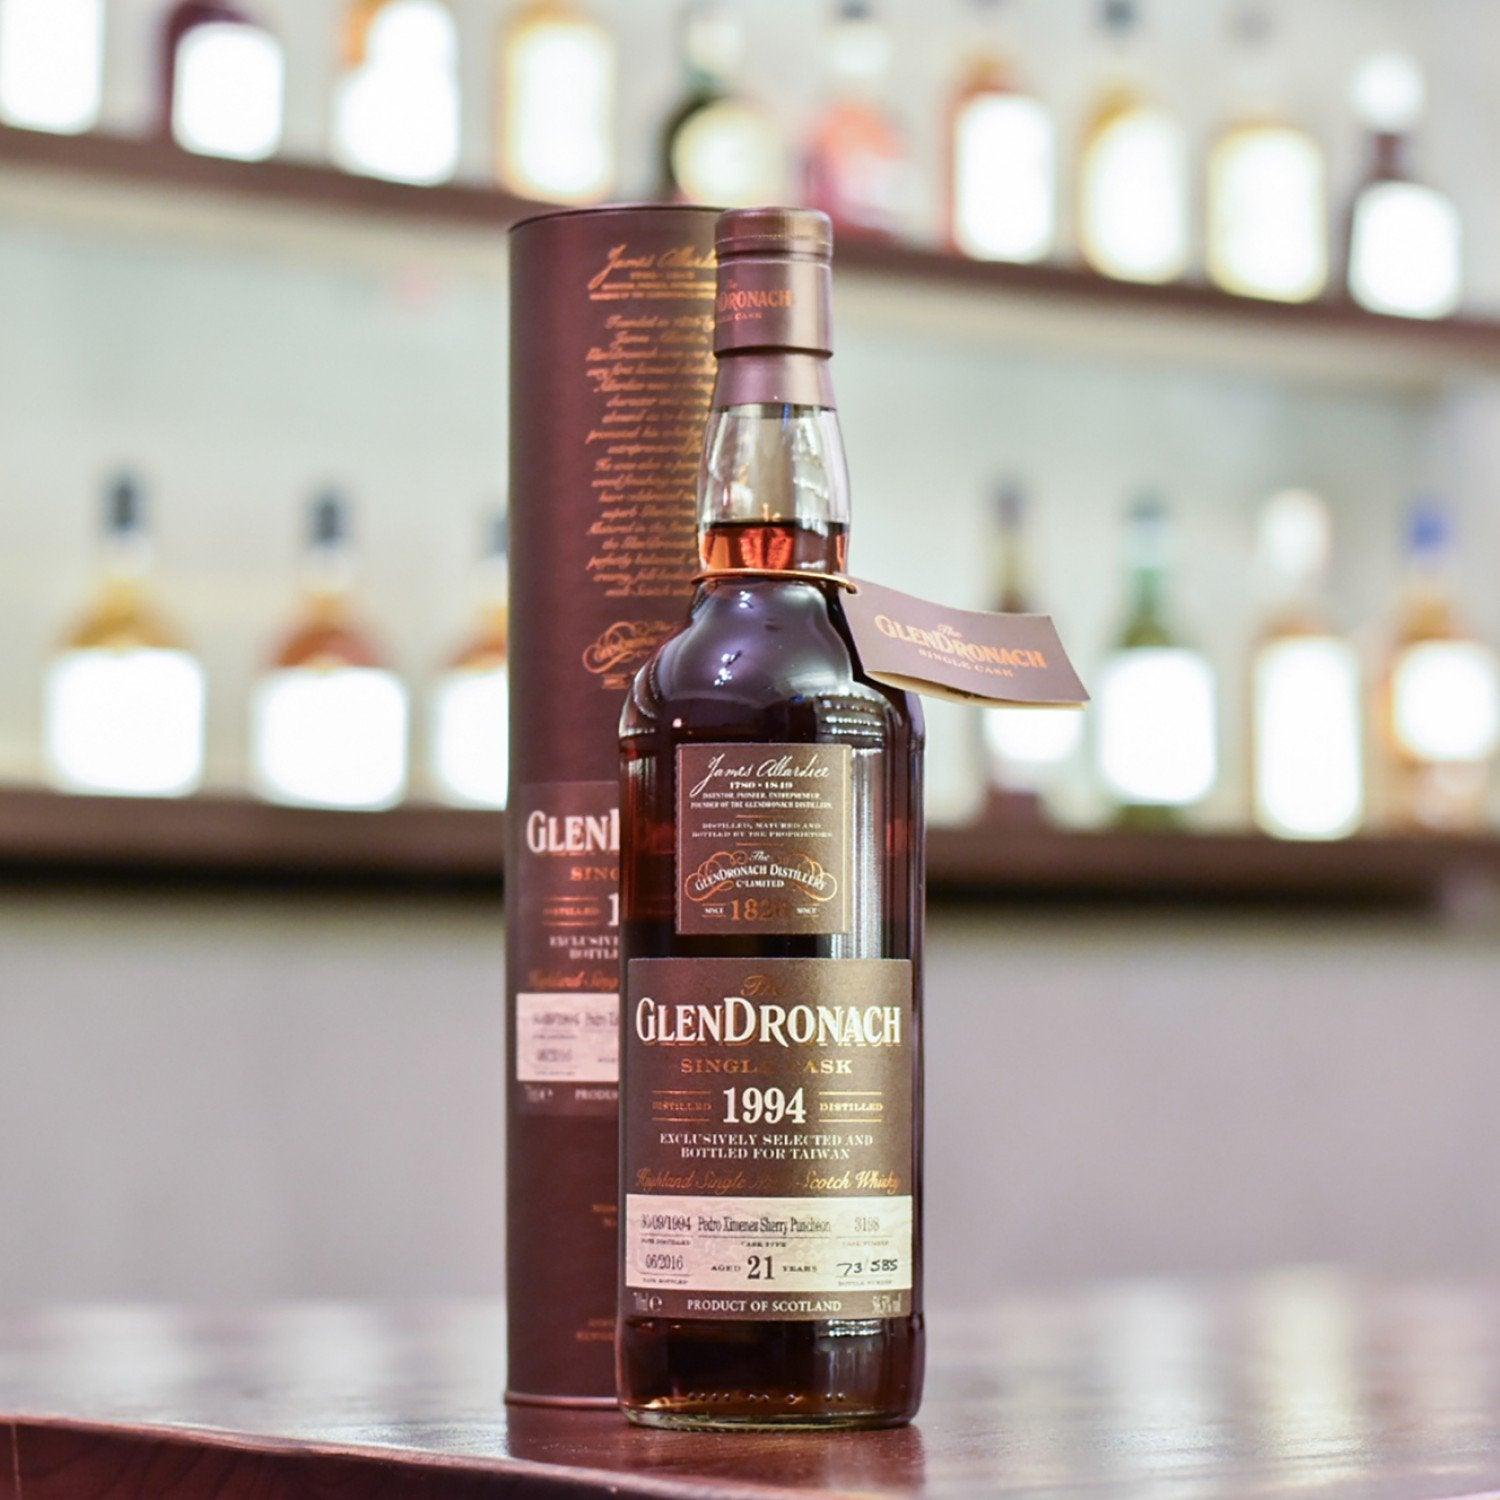 Glendronach 21 Year Old 1994 Taiwan Exclusive Cask 3198 - The Rare Malt